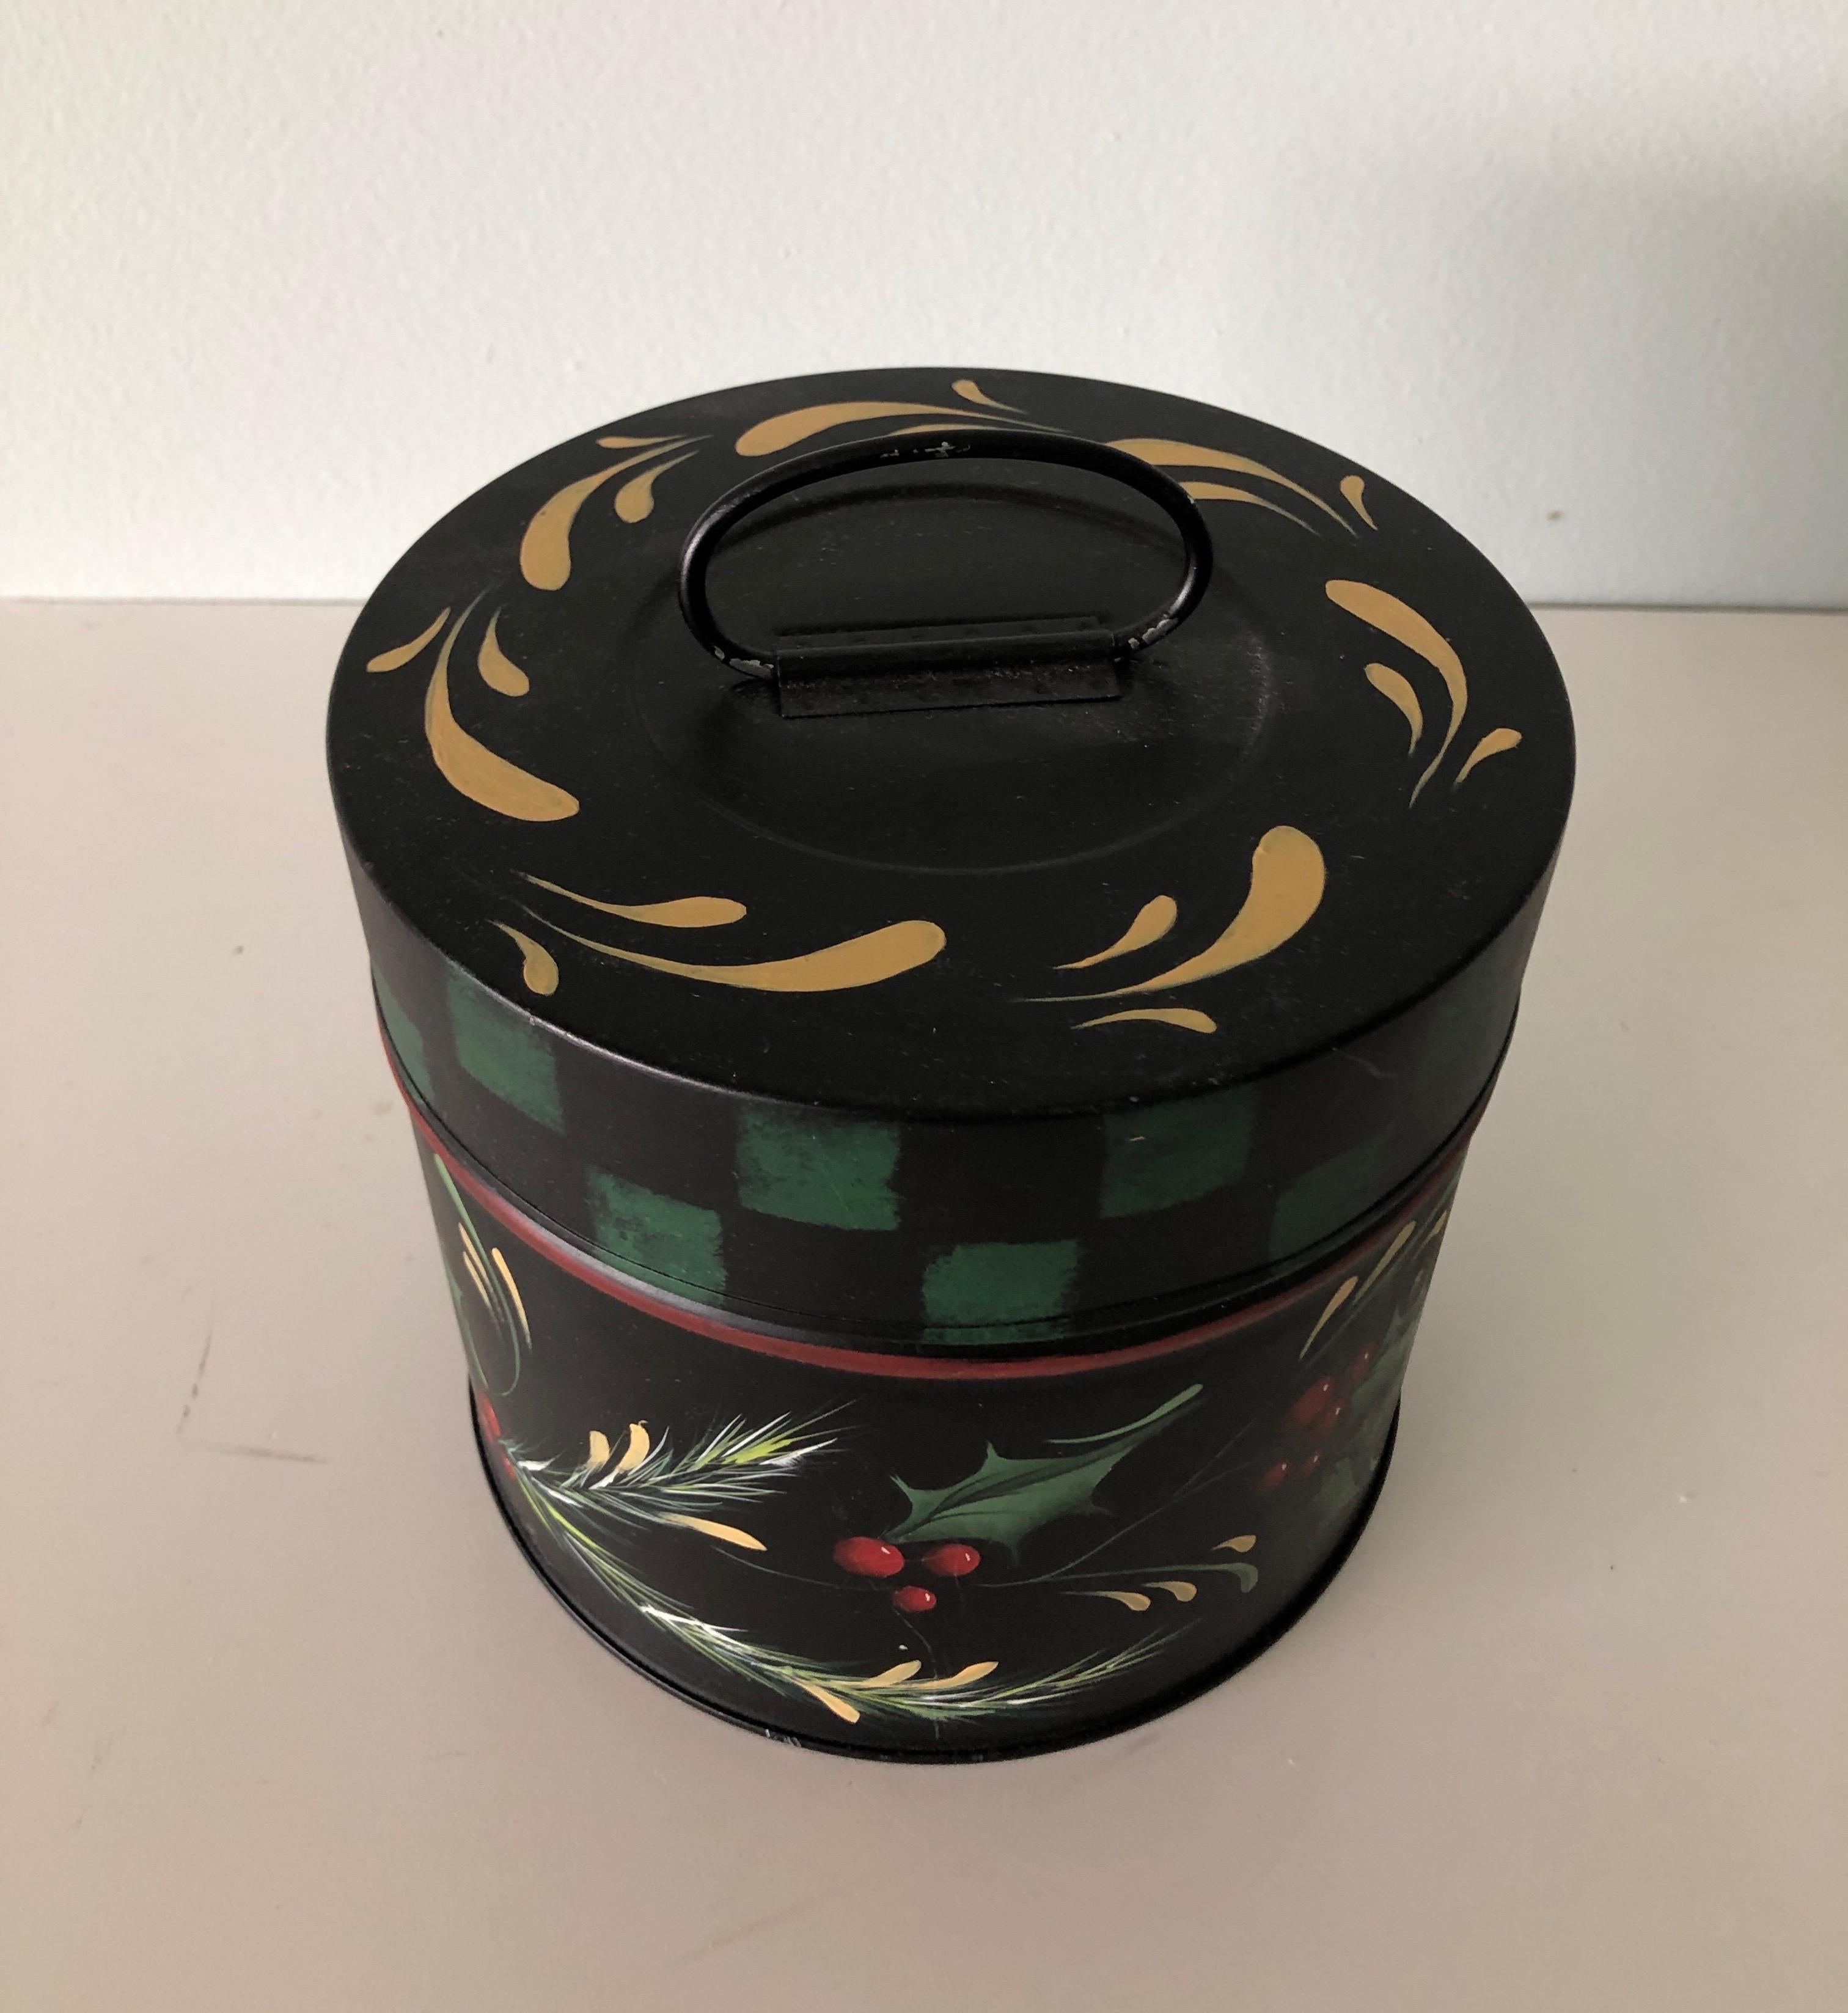 North American Vintage Round Tole Hand Painted Canister with Holiday Theme Hand Painted Details